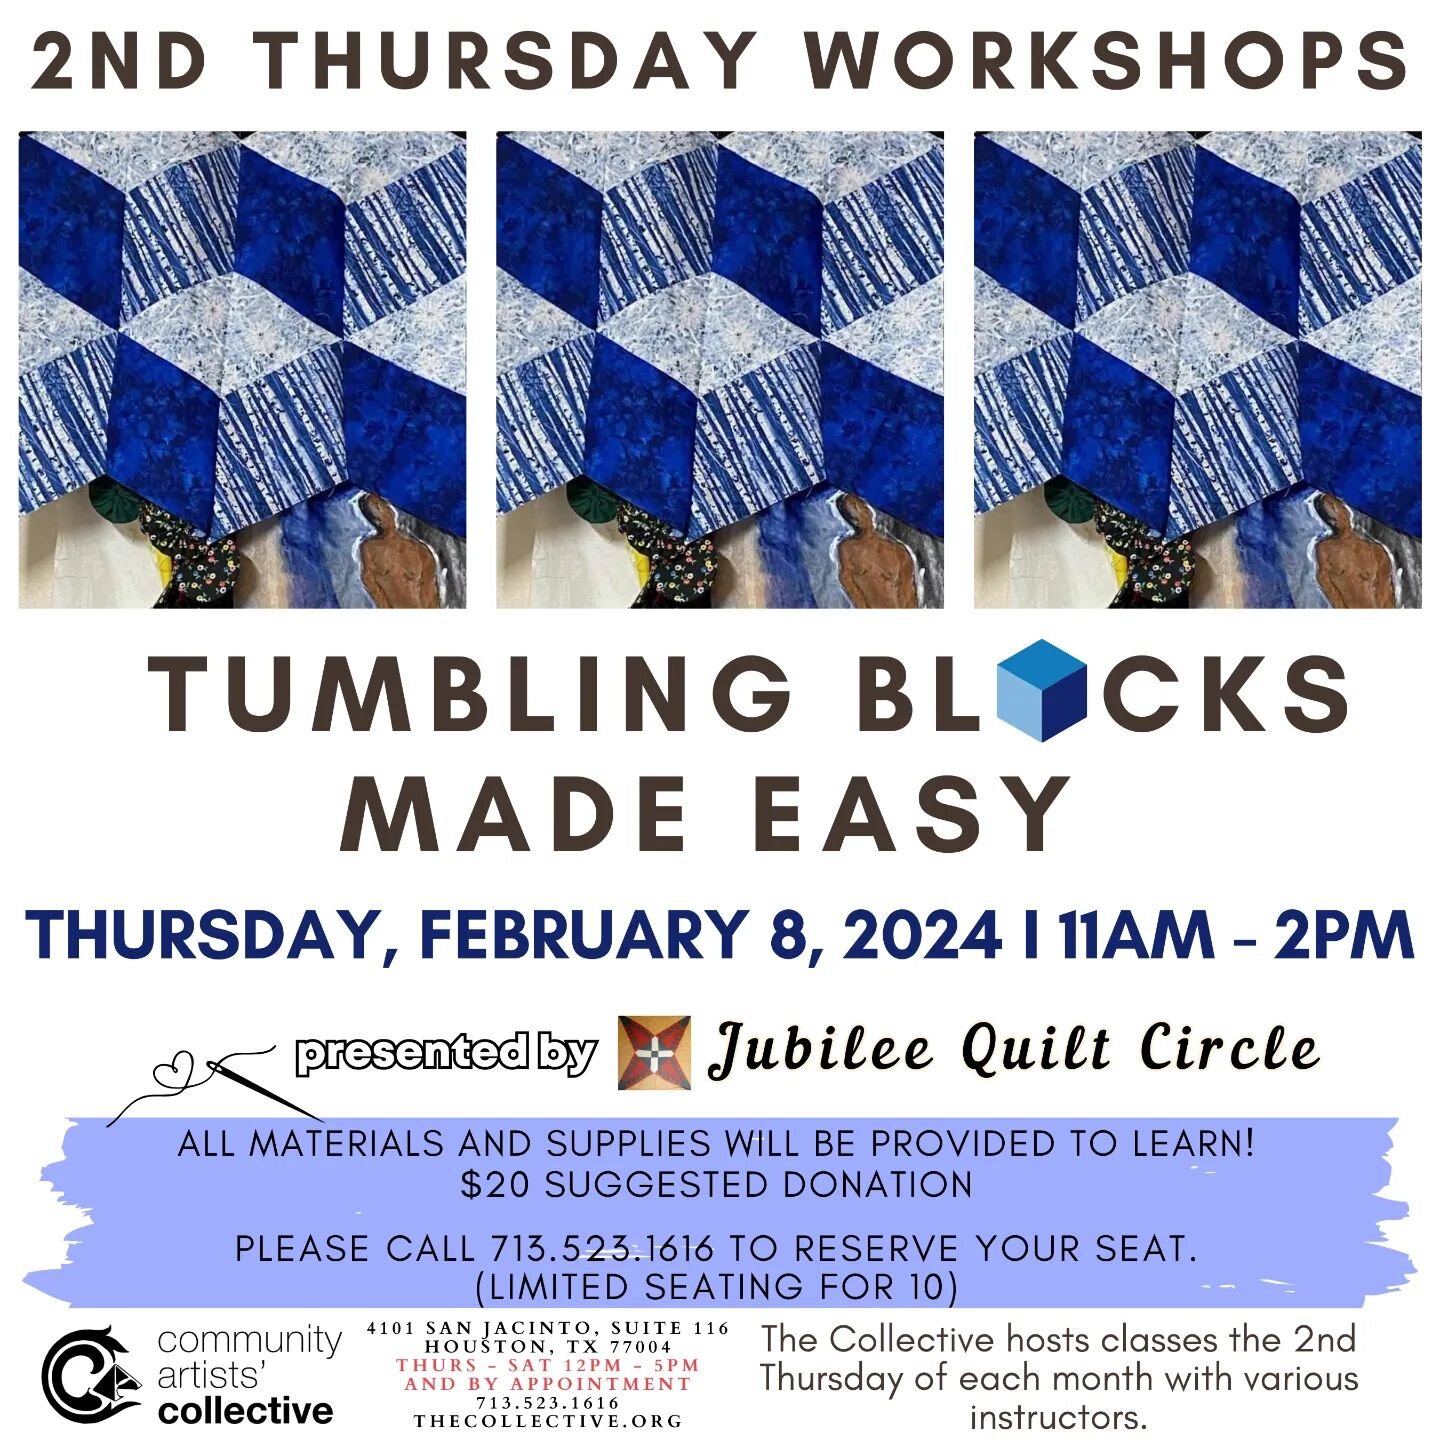 Bring a friend and reserve your seat for our first 2nd Thursday Workshop of 2024! 

This month our beloved Leslie of the Jubilee Quilt Circle will be teaching us about 🟦 Tumbling Blocks 🟦

Thursday, February 8, 2024
11am - 2pm
#quilt #craft #worksh